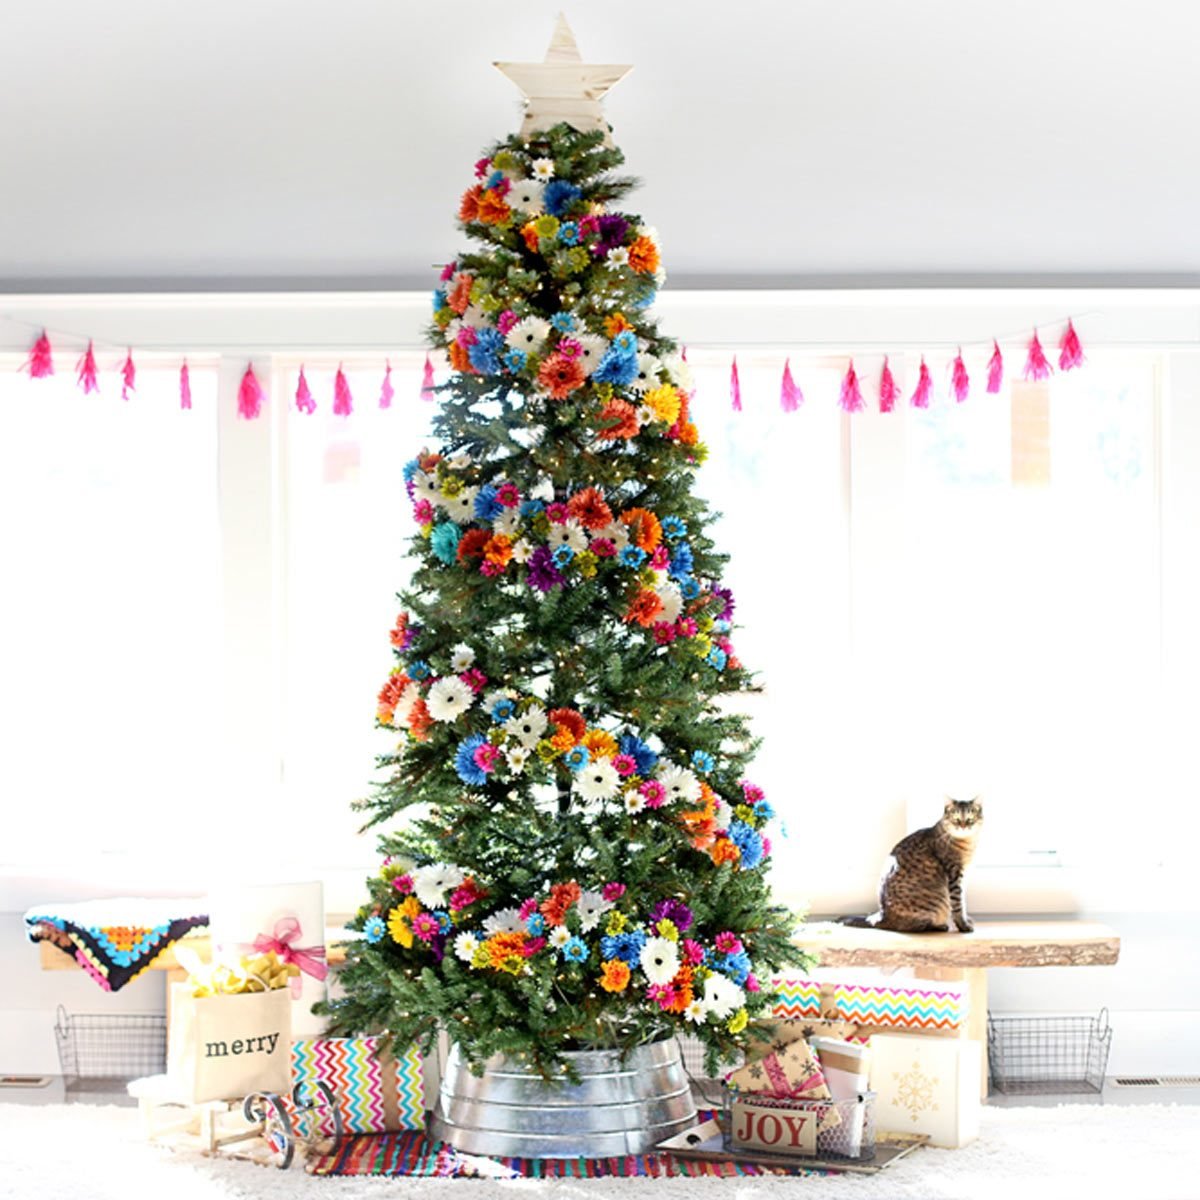 100 Incredible Christmas Tree Decorating Ideas The Family Handyman,Last Minute Homemade Diy Spooky Outdoor Halloween Decorations